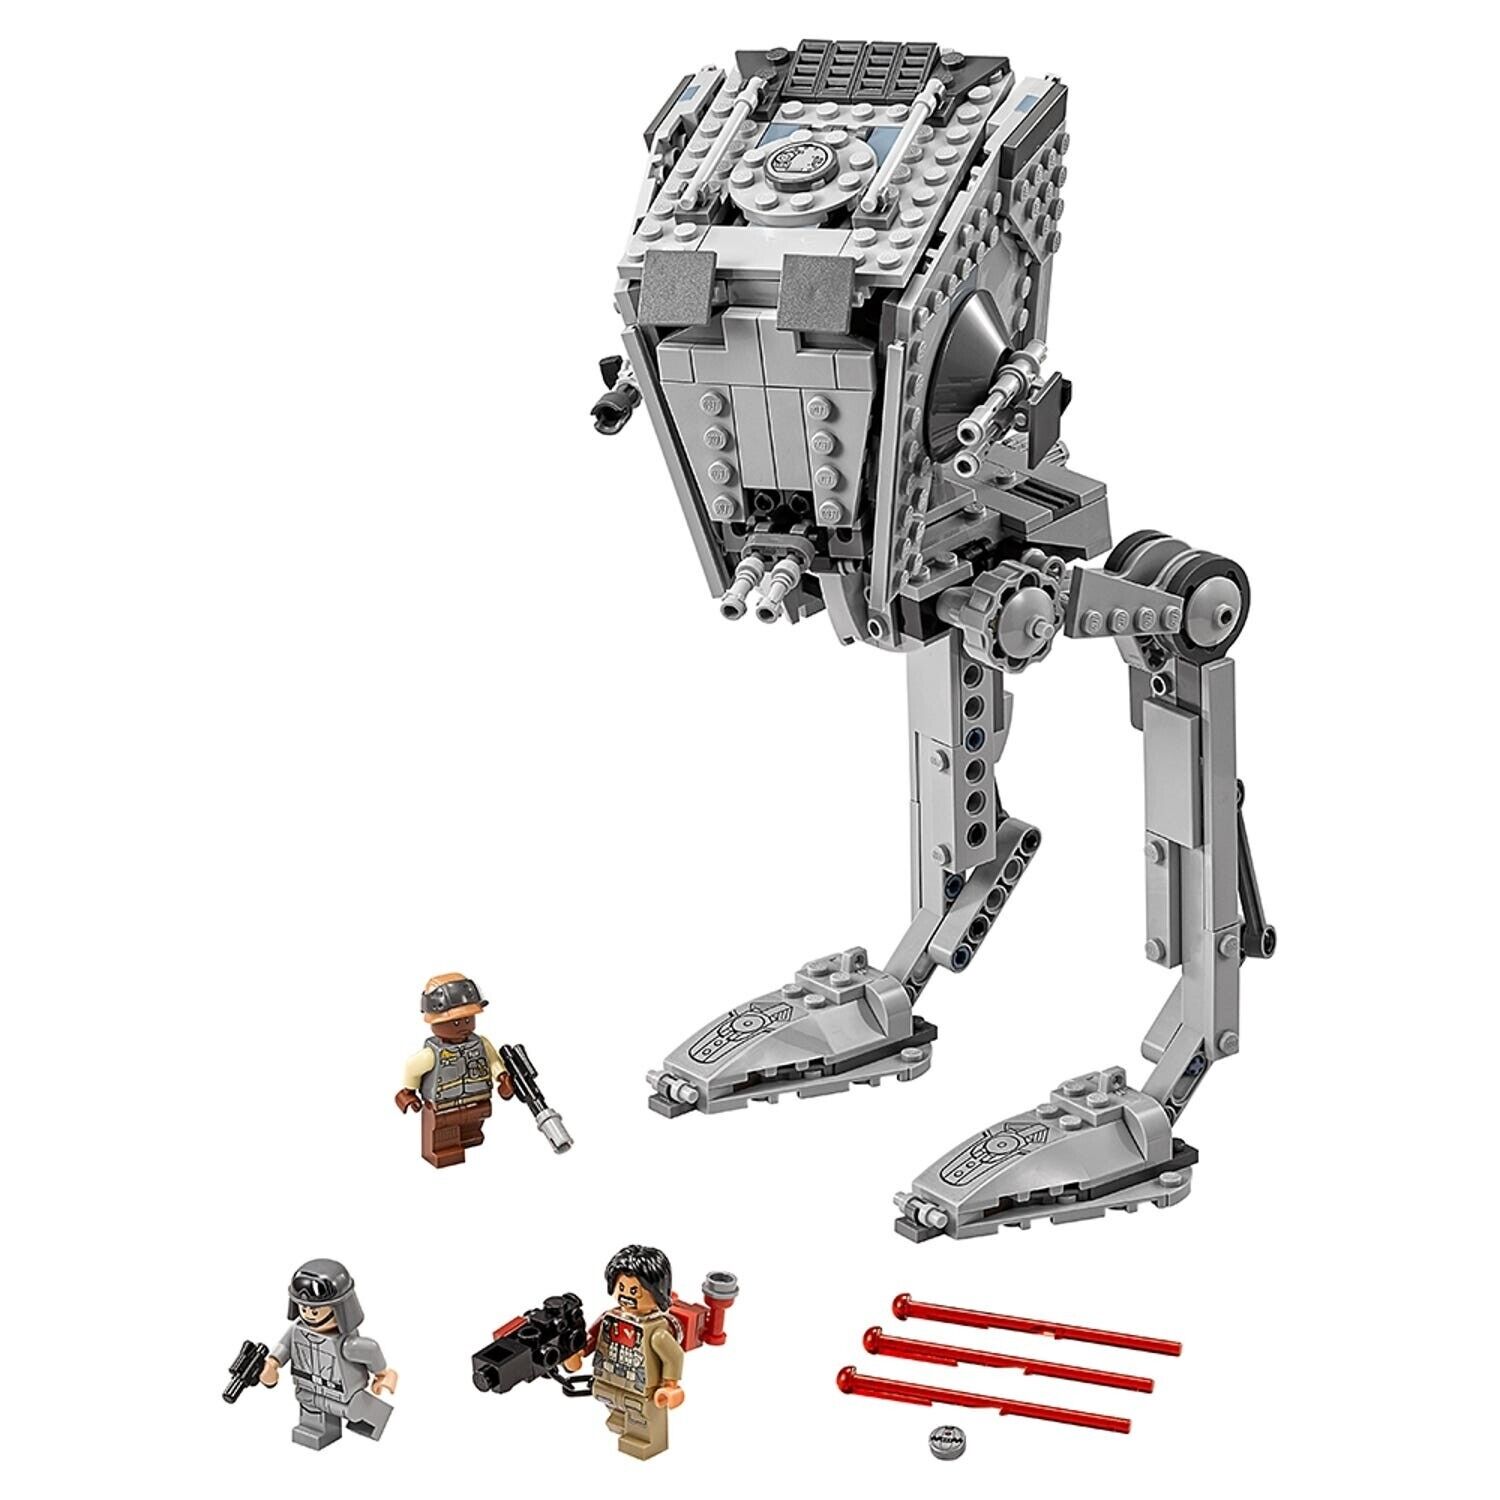 LEGO Star Wars: AT-ST (75153) - Complete with Instructions | eBay